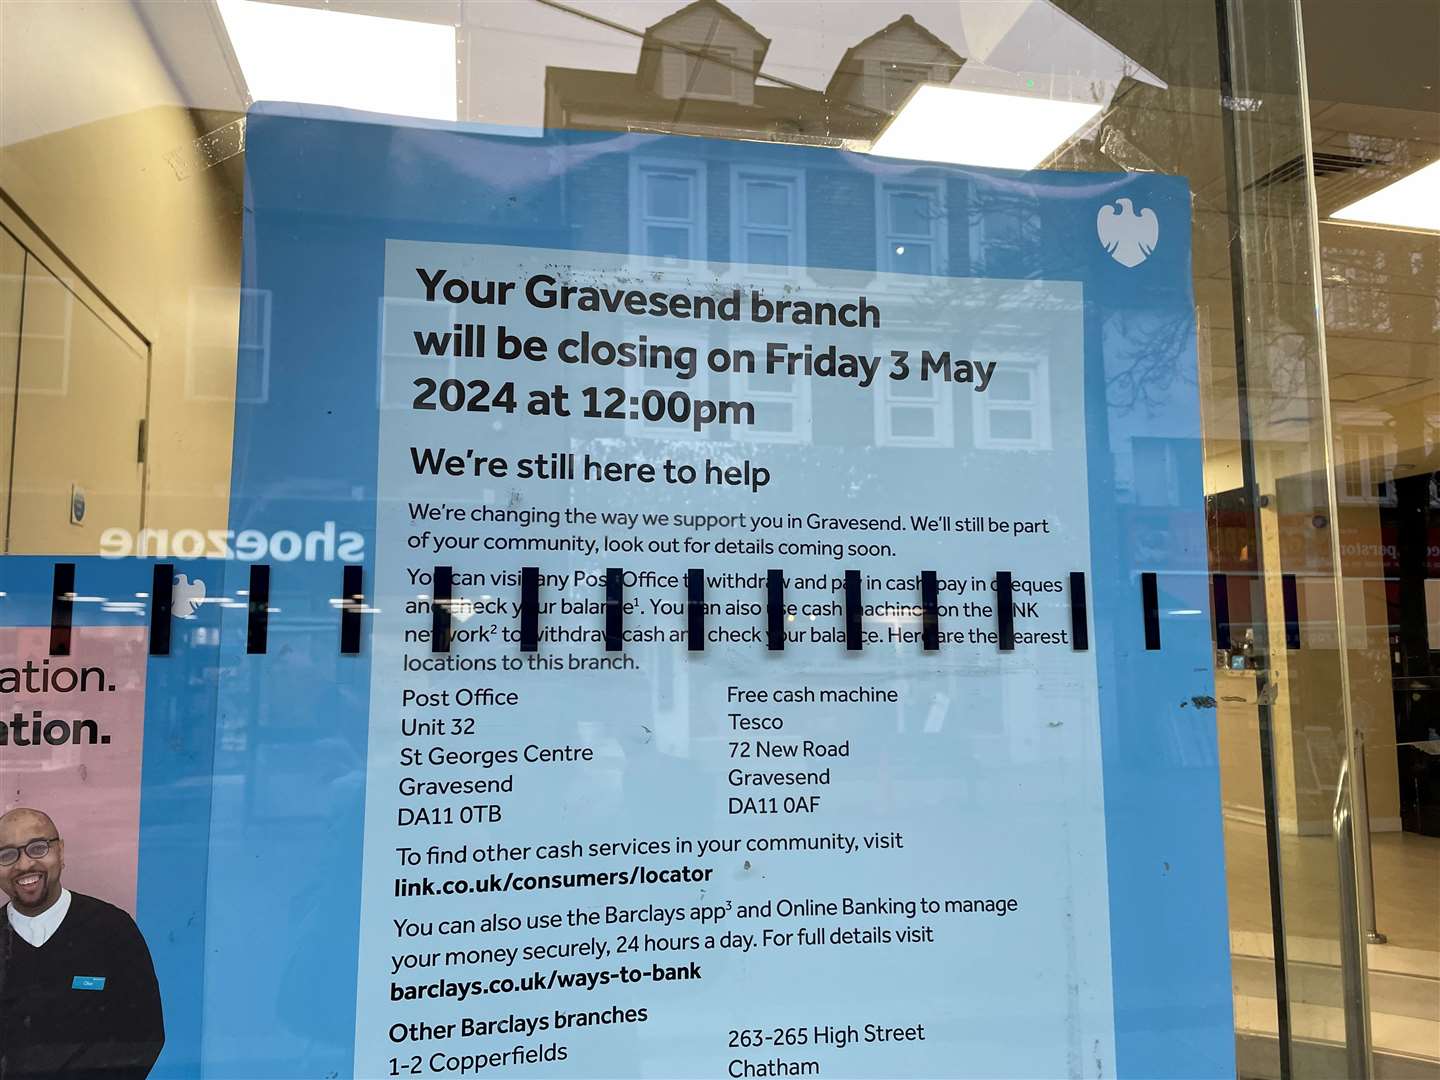 Barclays closed its Gravesend branch in May